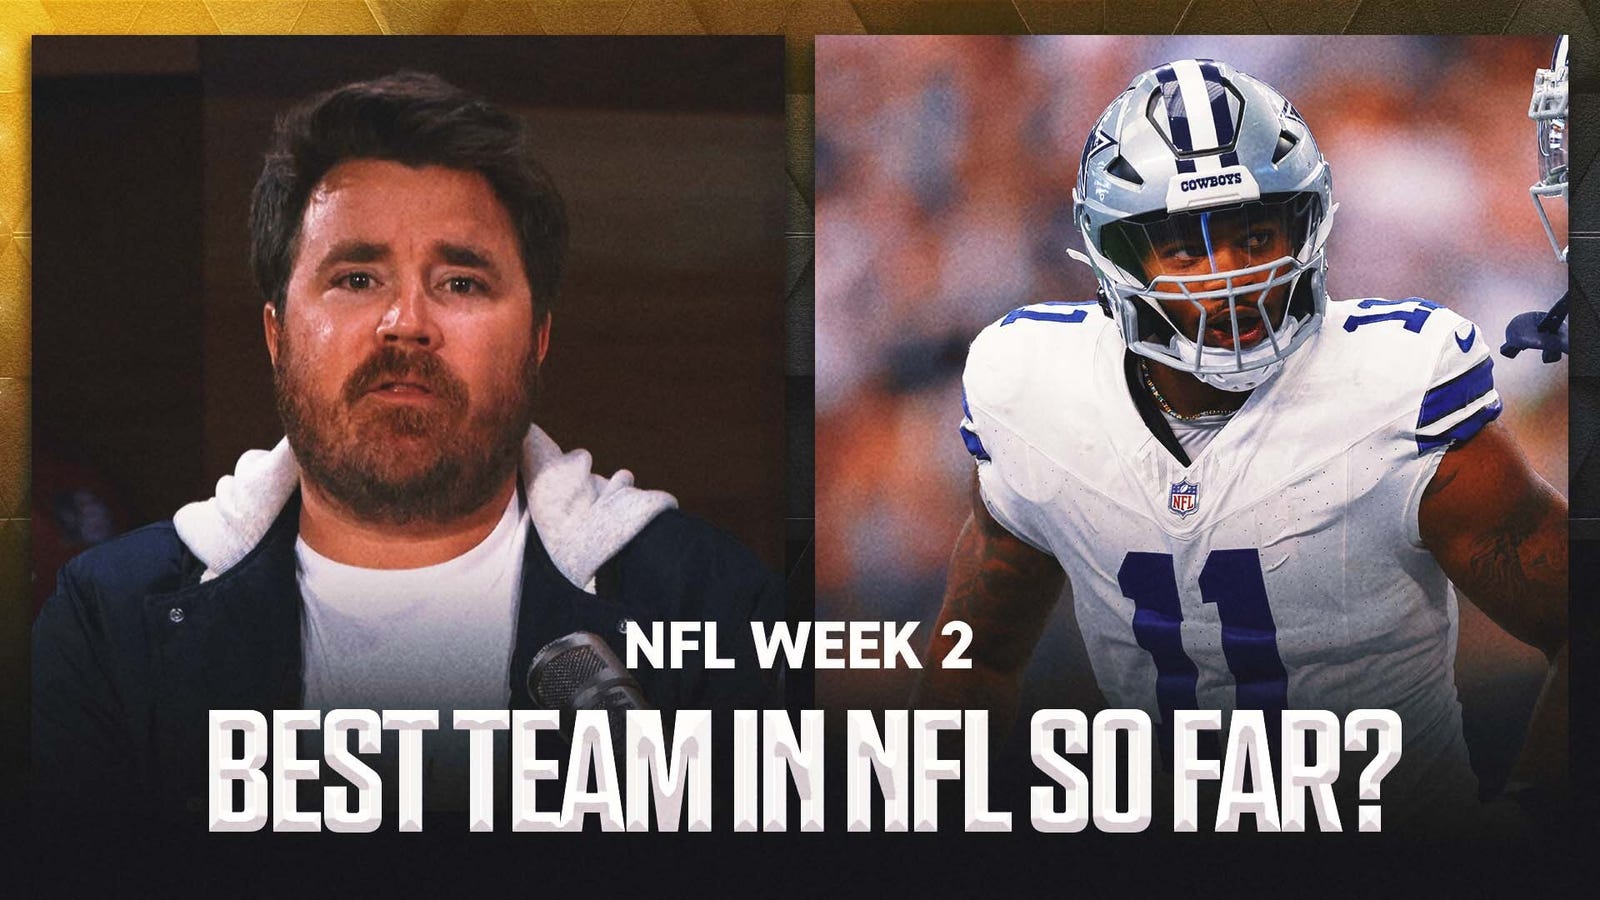 David Helman looks at if the Cowboys are the NFL's best team for far. 